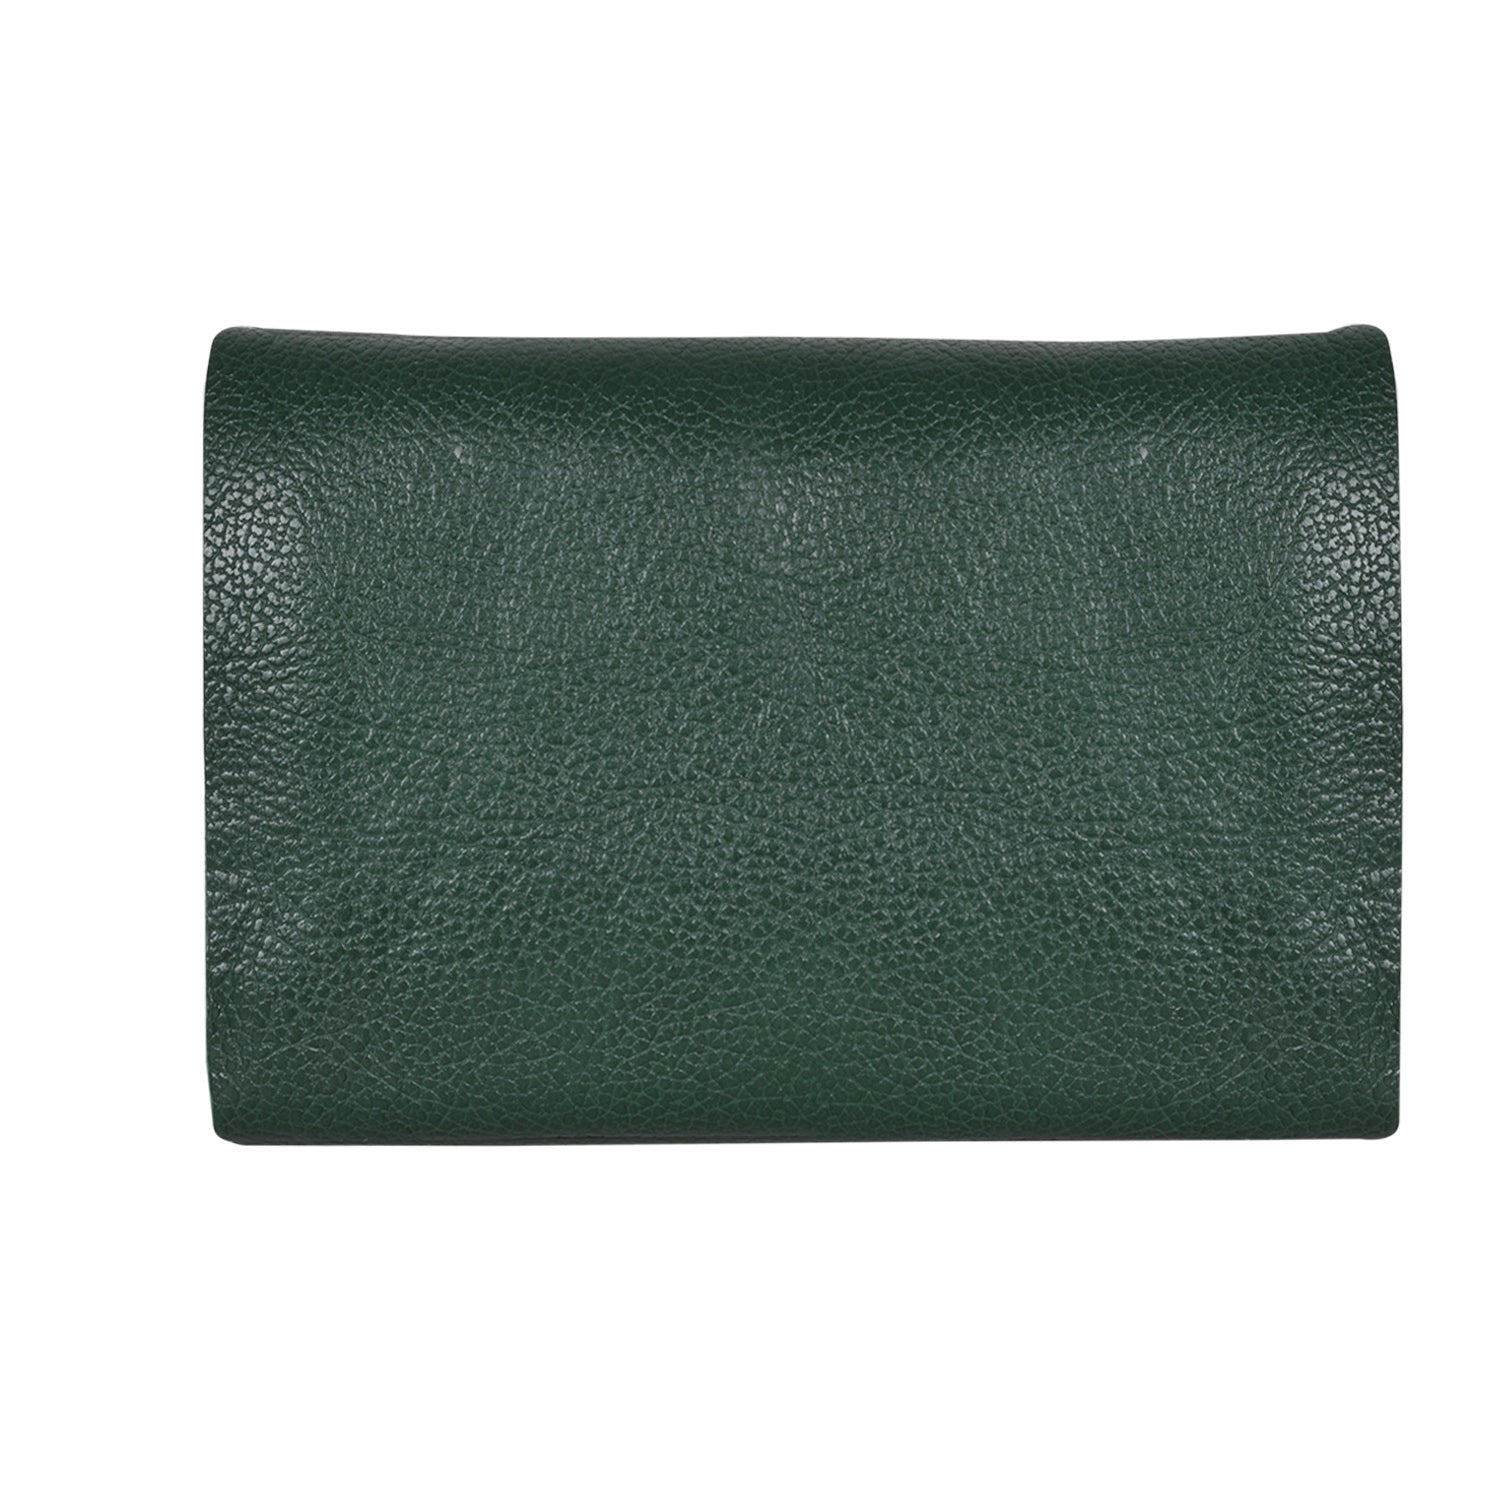 IL BISONTE UNISEX COMPACT FOLDING WALLET IN GREEN COWHIDE LEATHER